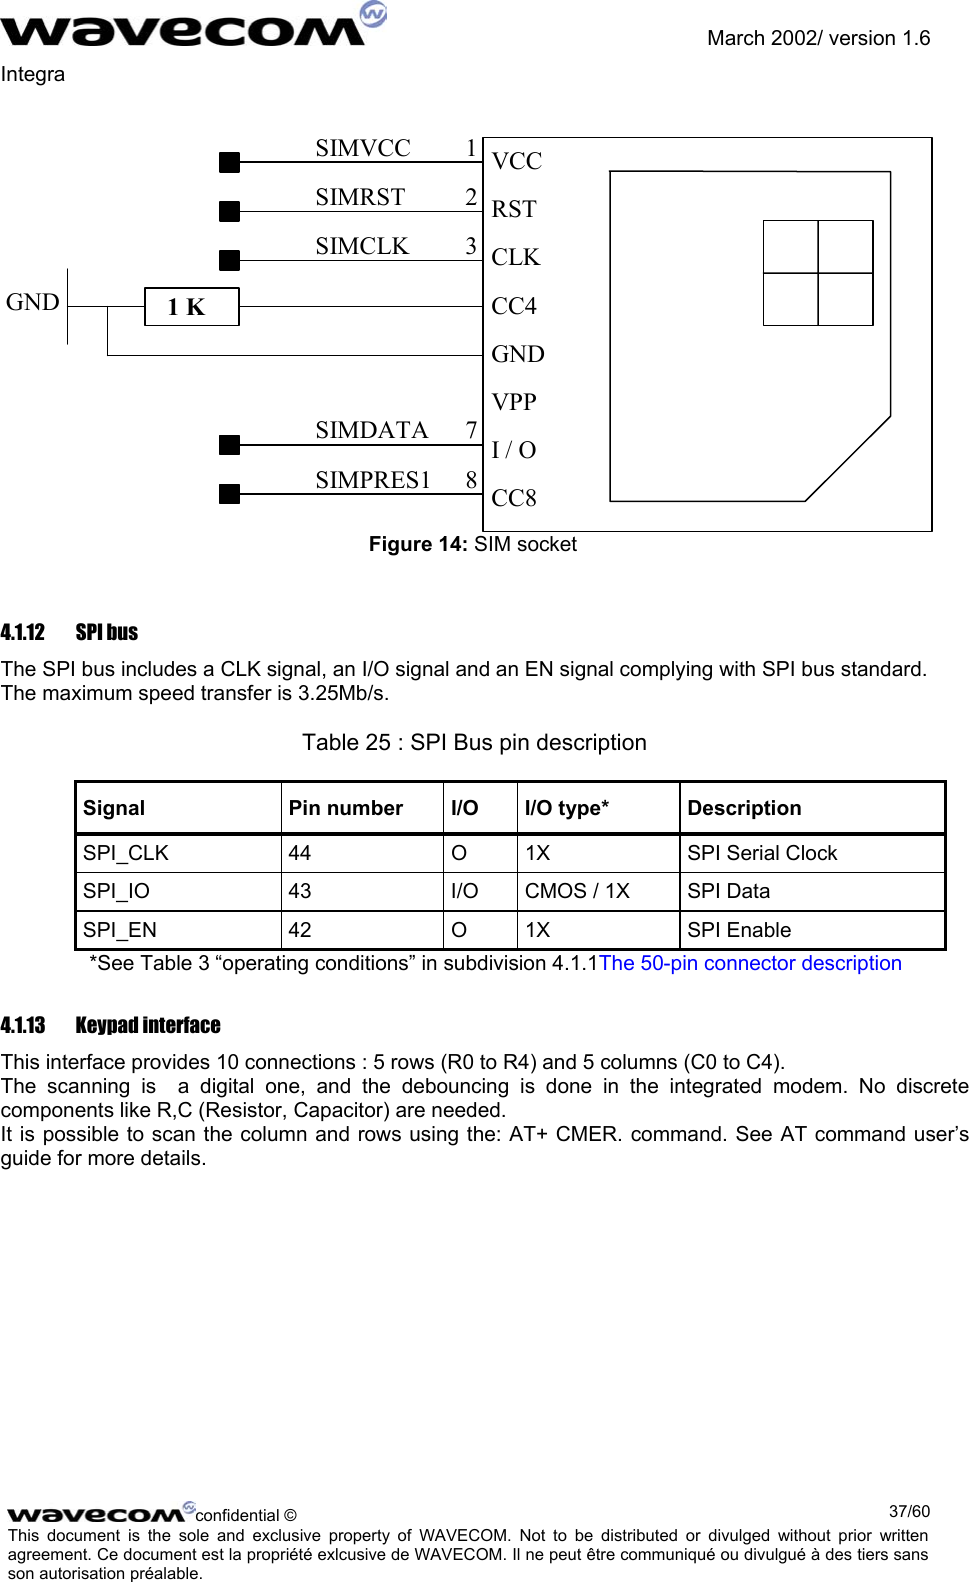               March 2002/ version 1.6 Integra   SIMVCC 1SIMRST 2SIMCLK 3SIMDATA 7SIMPRES1 8 1 K VCC RSTCLKCC4GNDVPPI / OCC8GND Figure 14: SIM socket 4.1.12  SPI bus  The SPI bus includes a CLK signal, an I/O signal and an EN signal complying with SPI bus standard. The maximum speed transfer is 3.25Mb/s.       Table 25 : SPI Bus pin description Signal  Pin number  I/O  I/O type*  Description SPI_CLK  44  O  1X  SPI Serial Clock SPI_IO  43  I/O  CMOS / 1X  SPI Data SPI_EN 42  O 1X  SPI Enable *See Table 3 “operating conditions” in subdivision 4.1.1The 50-pin connector description 4.1.13 Keypad interface This interface provides 10 connections : 5 rows (R0 to R4) and 5 columns (C0 to C4).  The scanning is  a digital one, and the debouncing is done in the integrated modem. No discrete components like R,C (Resistor, Capacitor) are needed. It is possible to scan the column and rows using the: AT+ CMER. command. See AT command user’s guide for more details.  confidential ©  37/60This document is the sole and exclusive property of WAVECOM. Not to be distributed or divulged without prior written agreement. Ce document est la propriété exlcusive de WAVECOM. Il ne peut être communiqué ou divulgué à des tiers sans son autorisation préalable.  